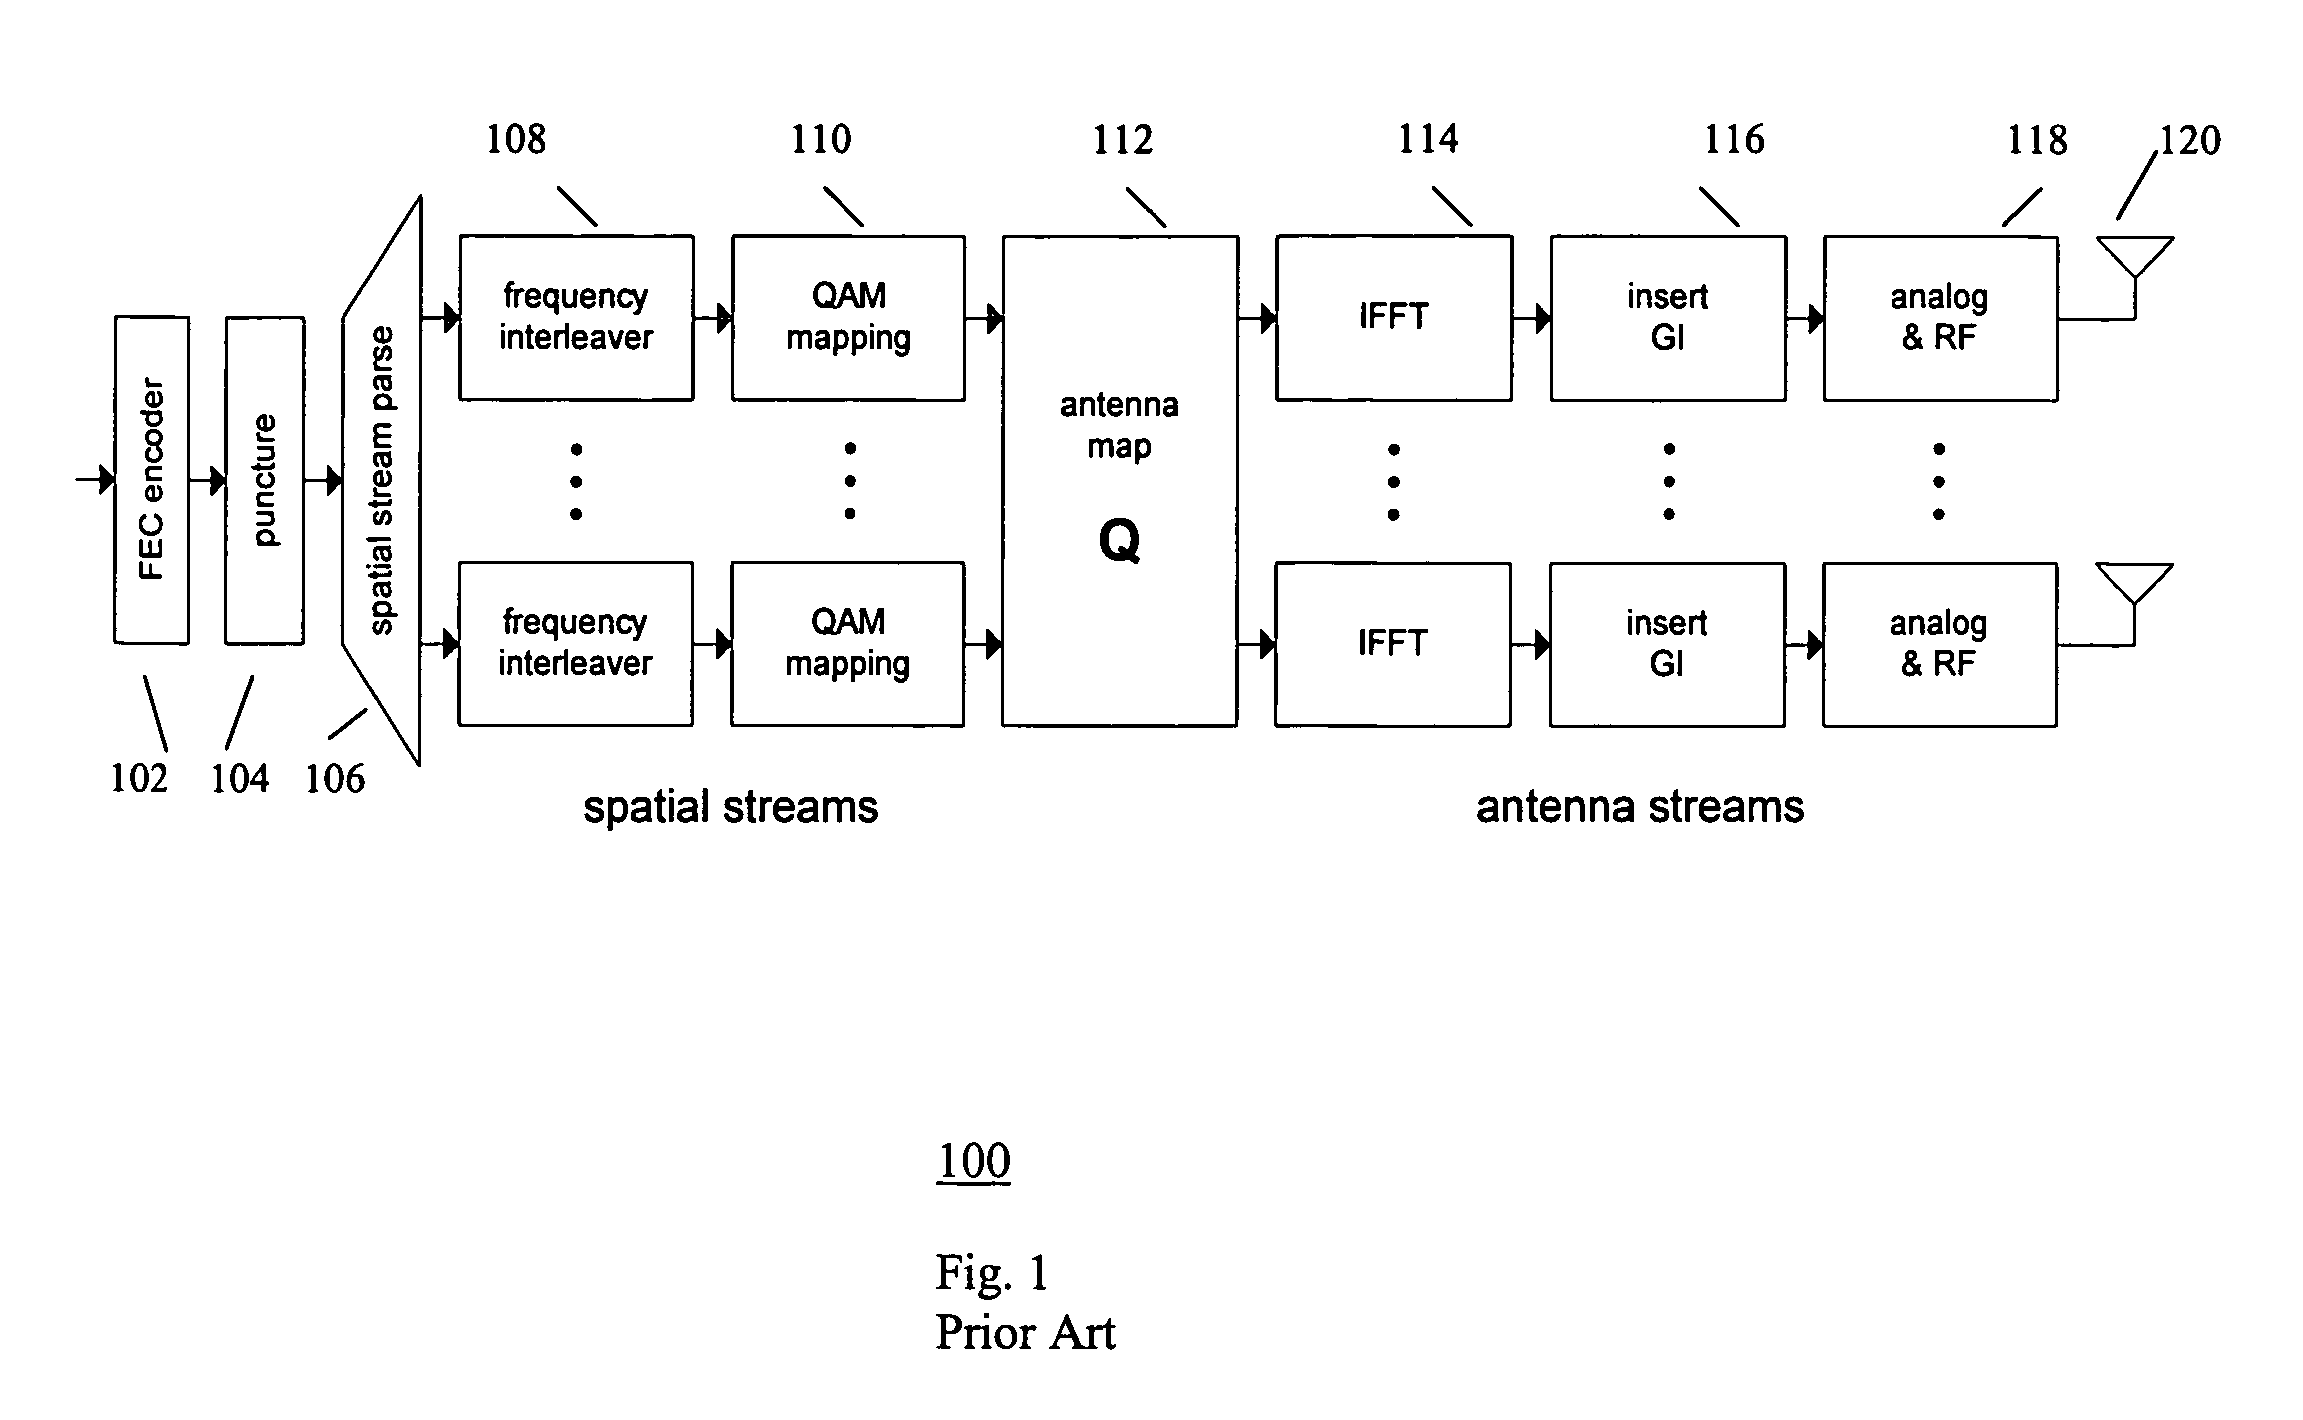 Interleaver design with multiple encoders for more than two transmit antennas in high throughput WLAN communication systems